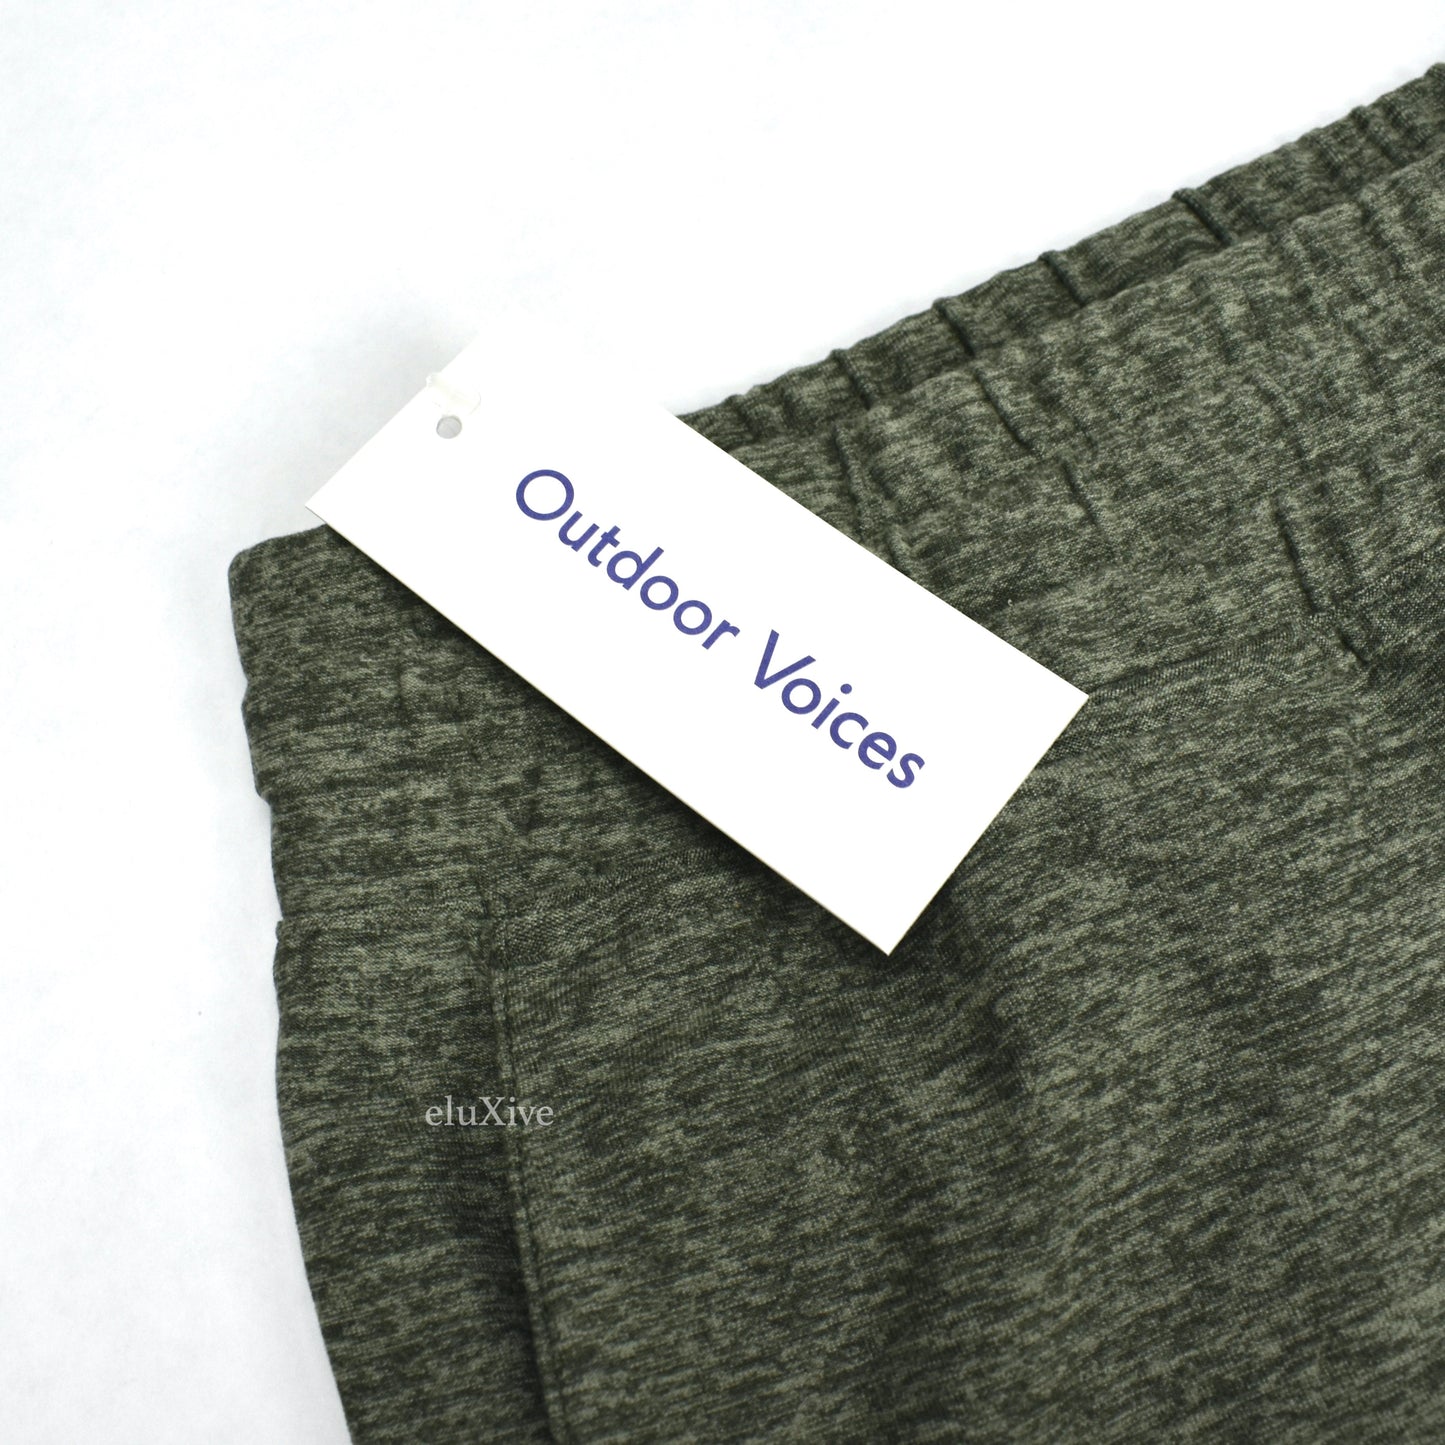 Outdoor Voices - Tea Tree Green All Day Cloudknit Sweatpants